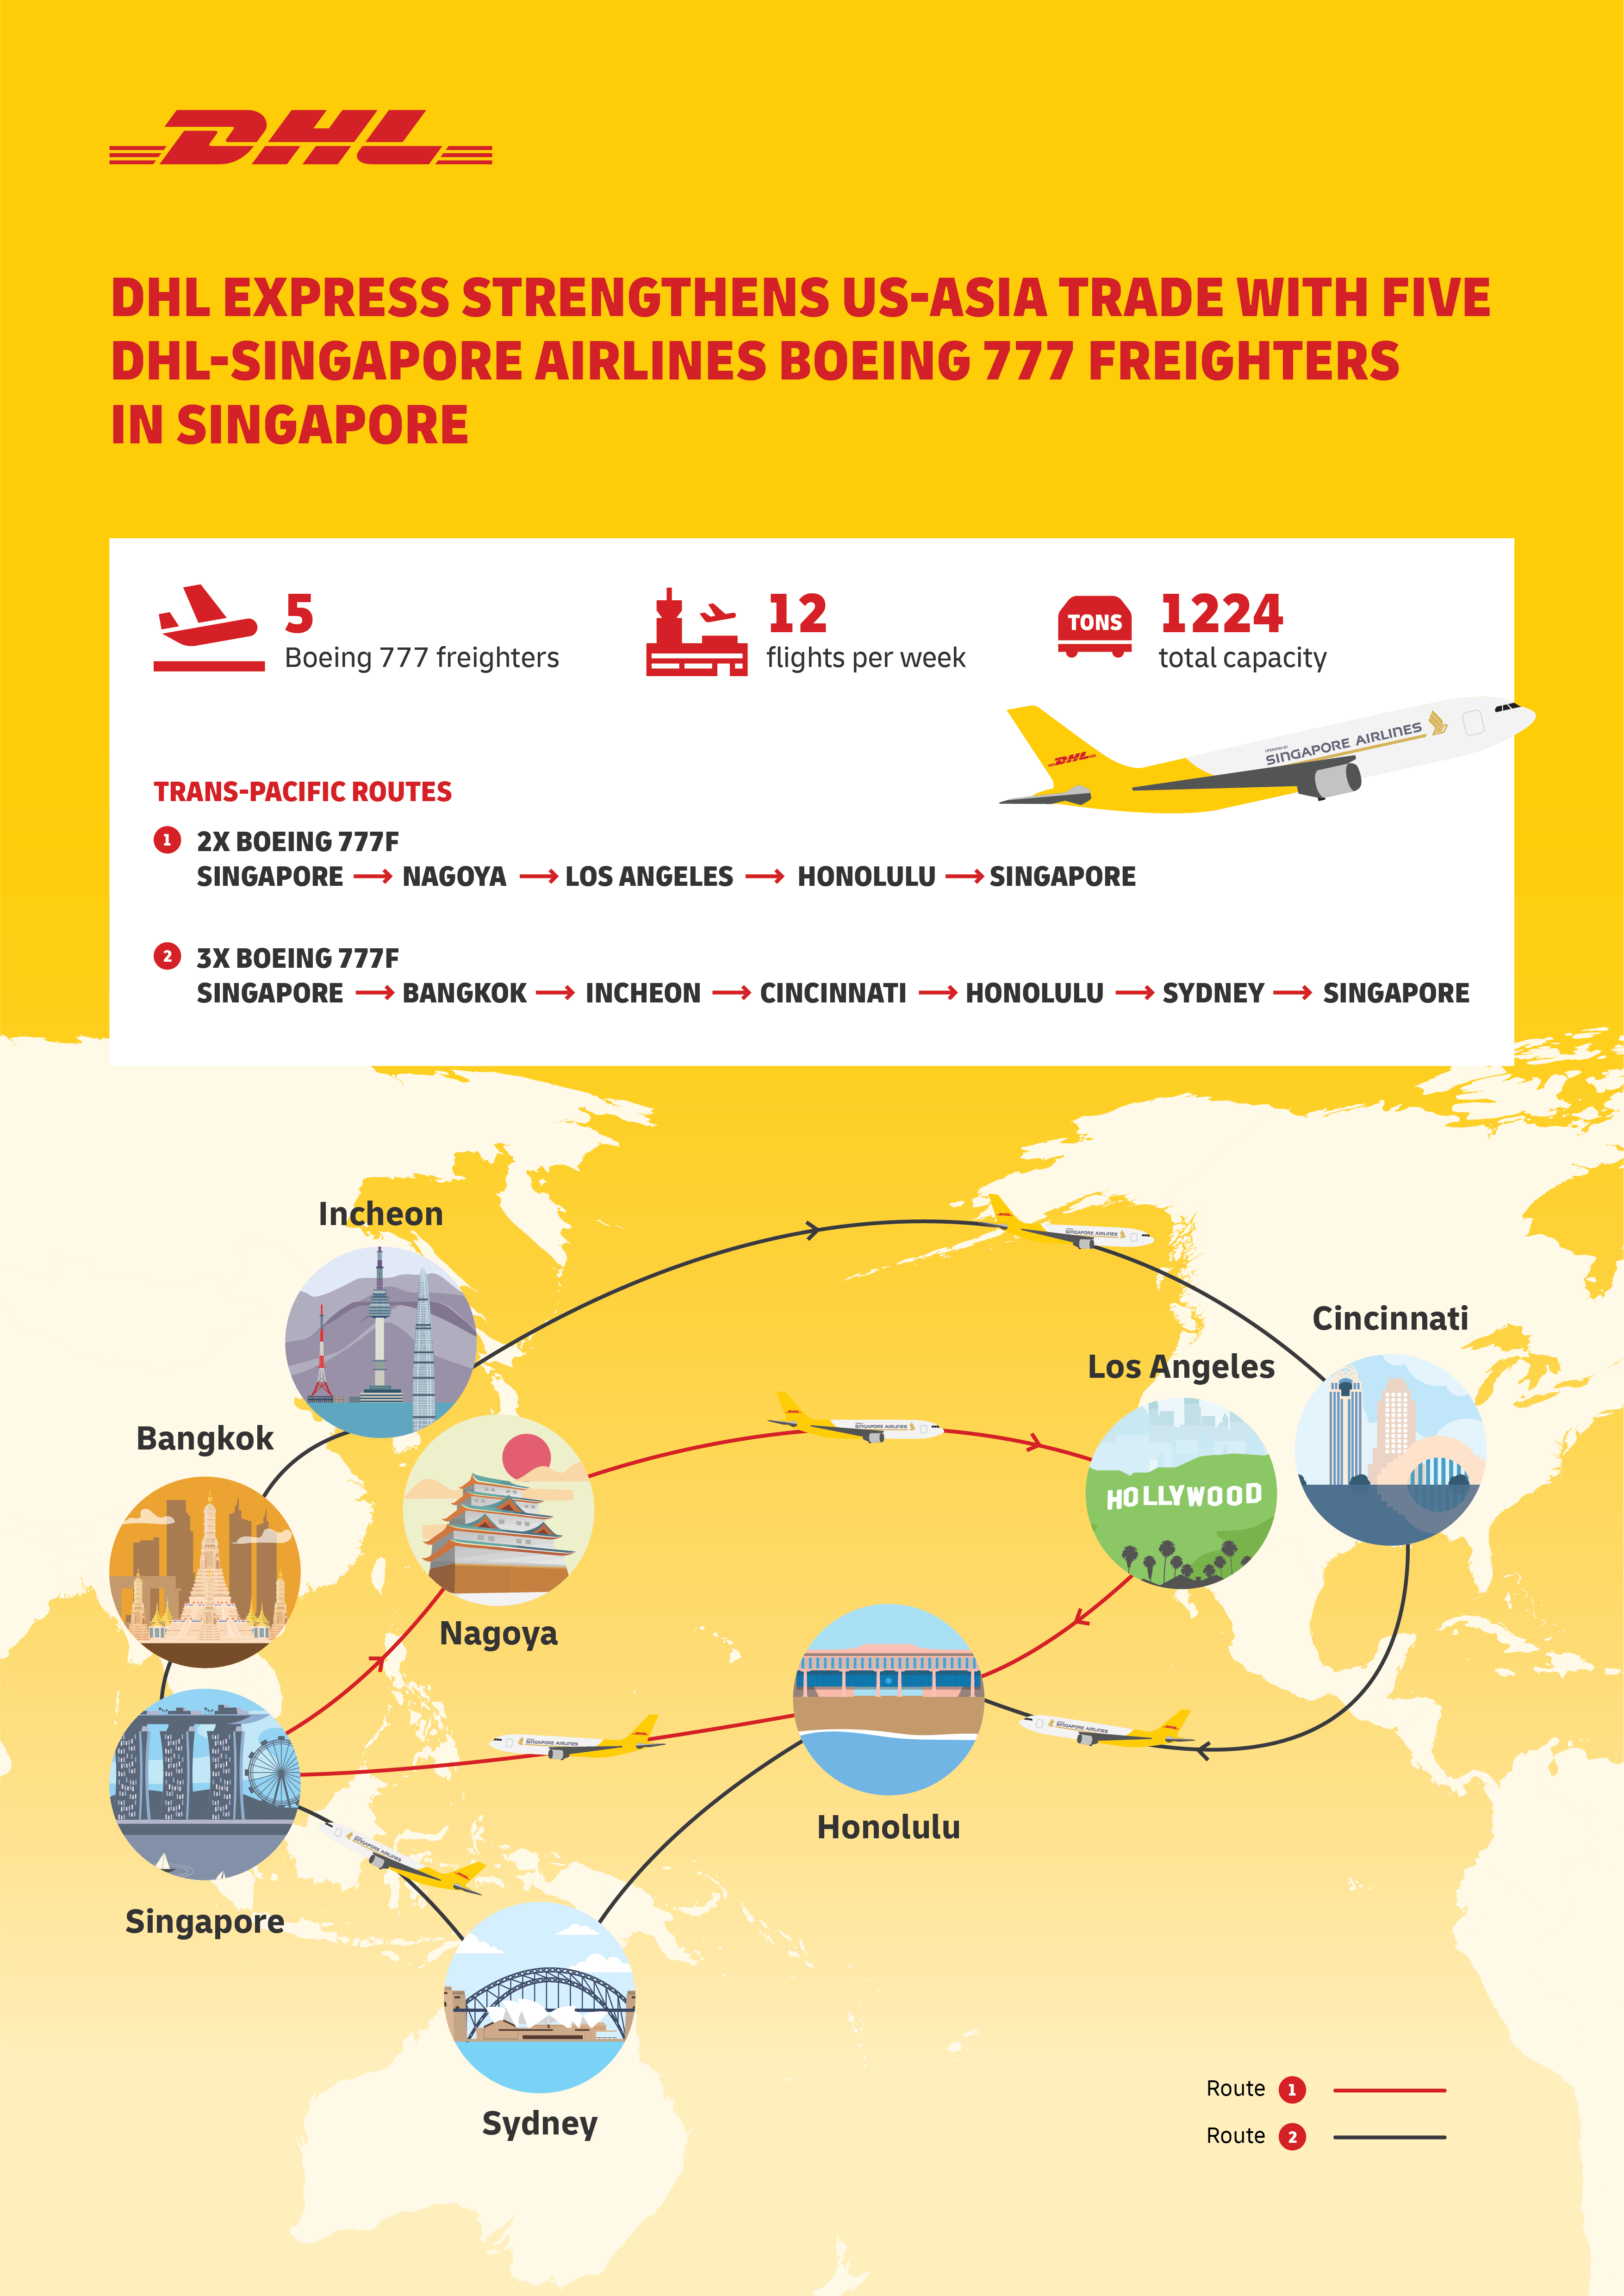 DHL Express strengthens US-Asia trade with deployment of fifth DHL-SIA Boeing 777 freighter in Singapore